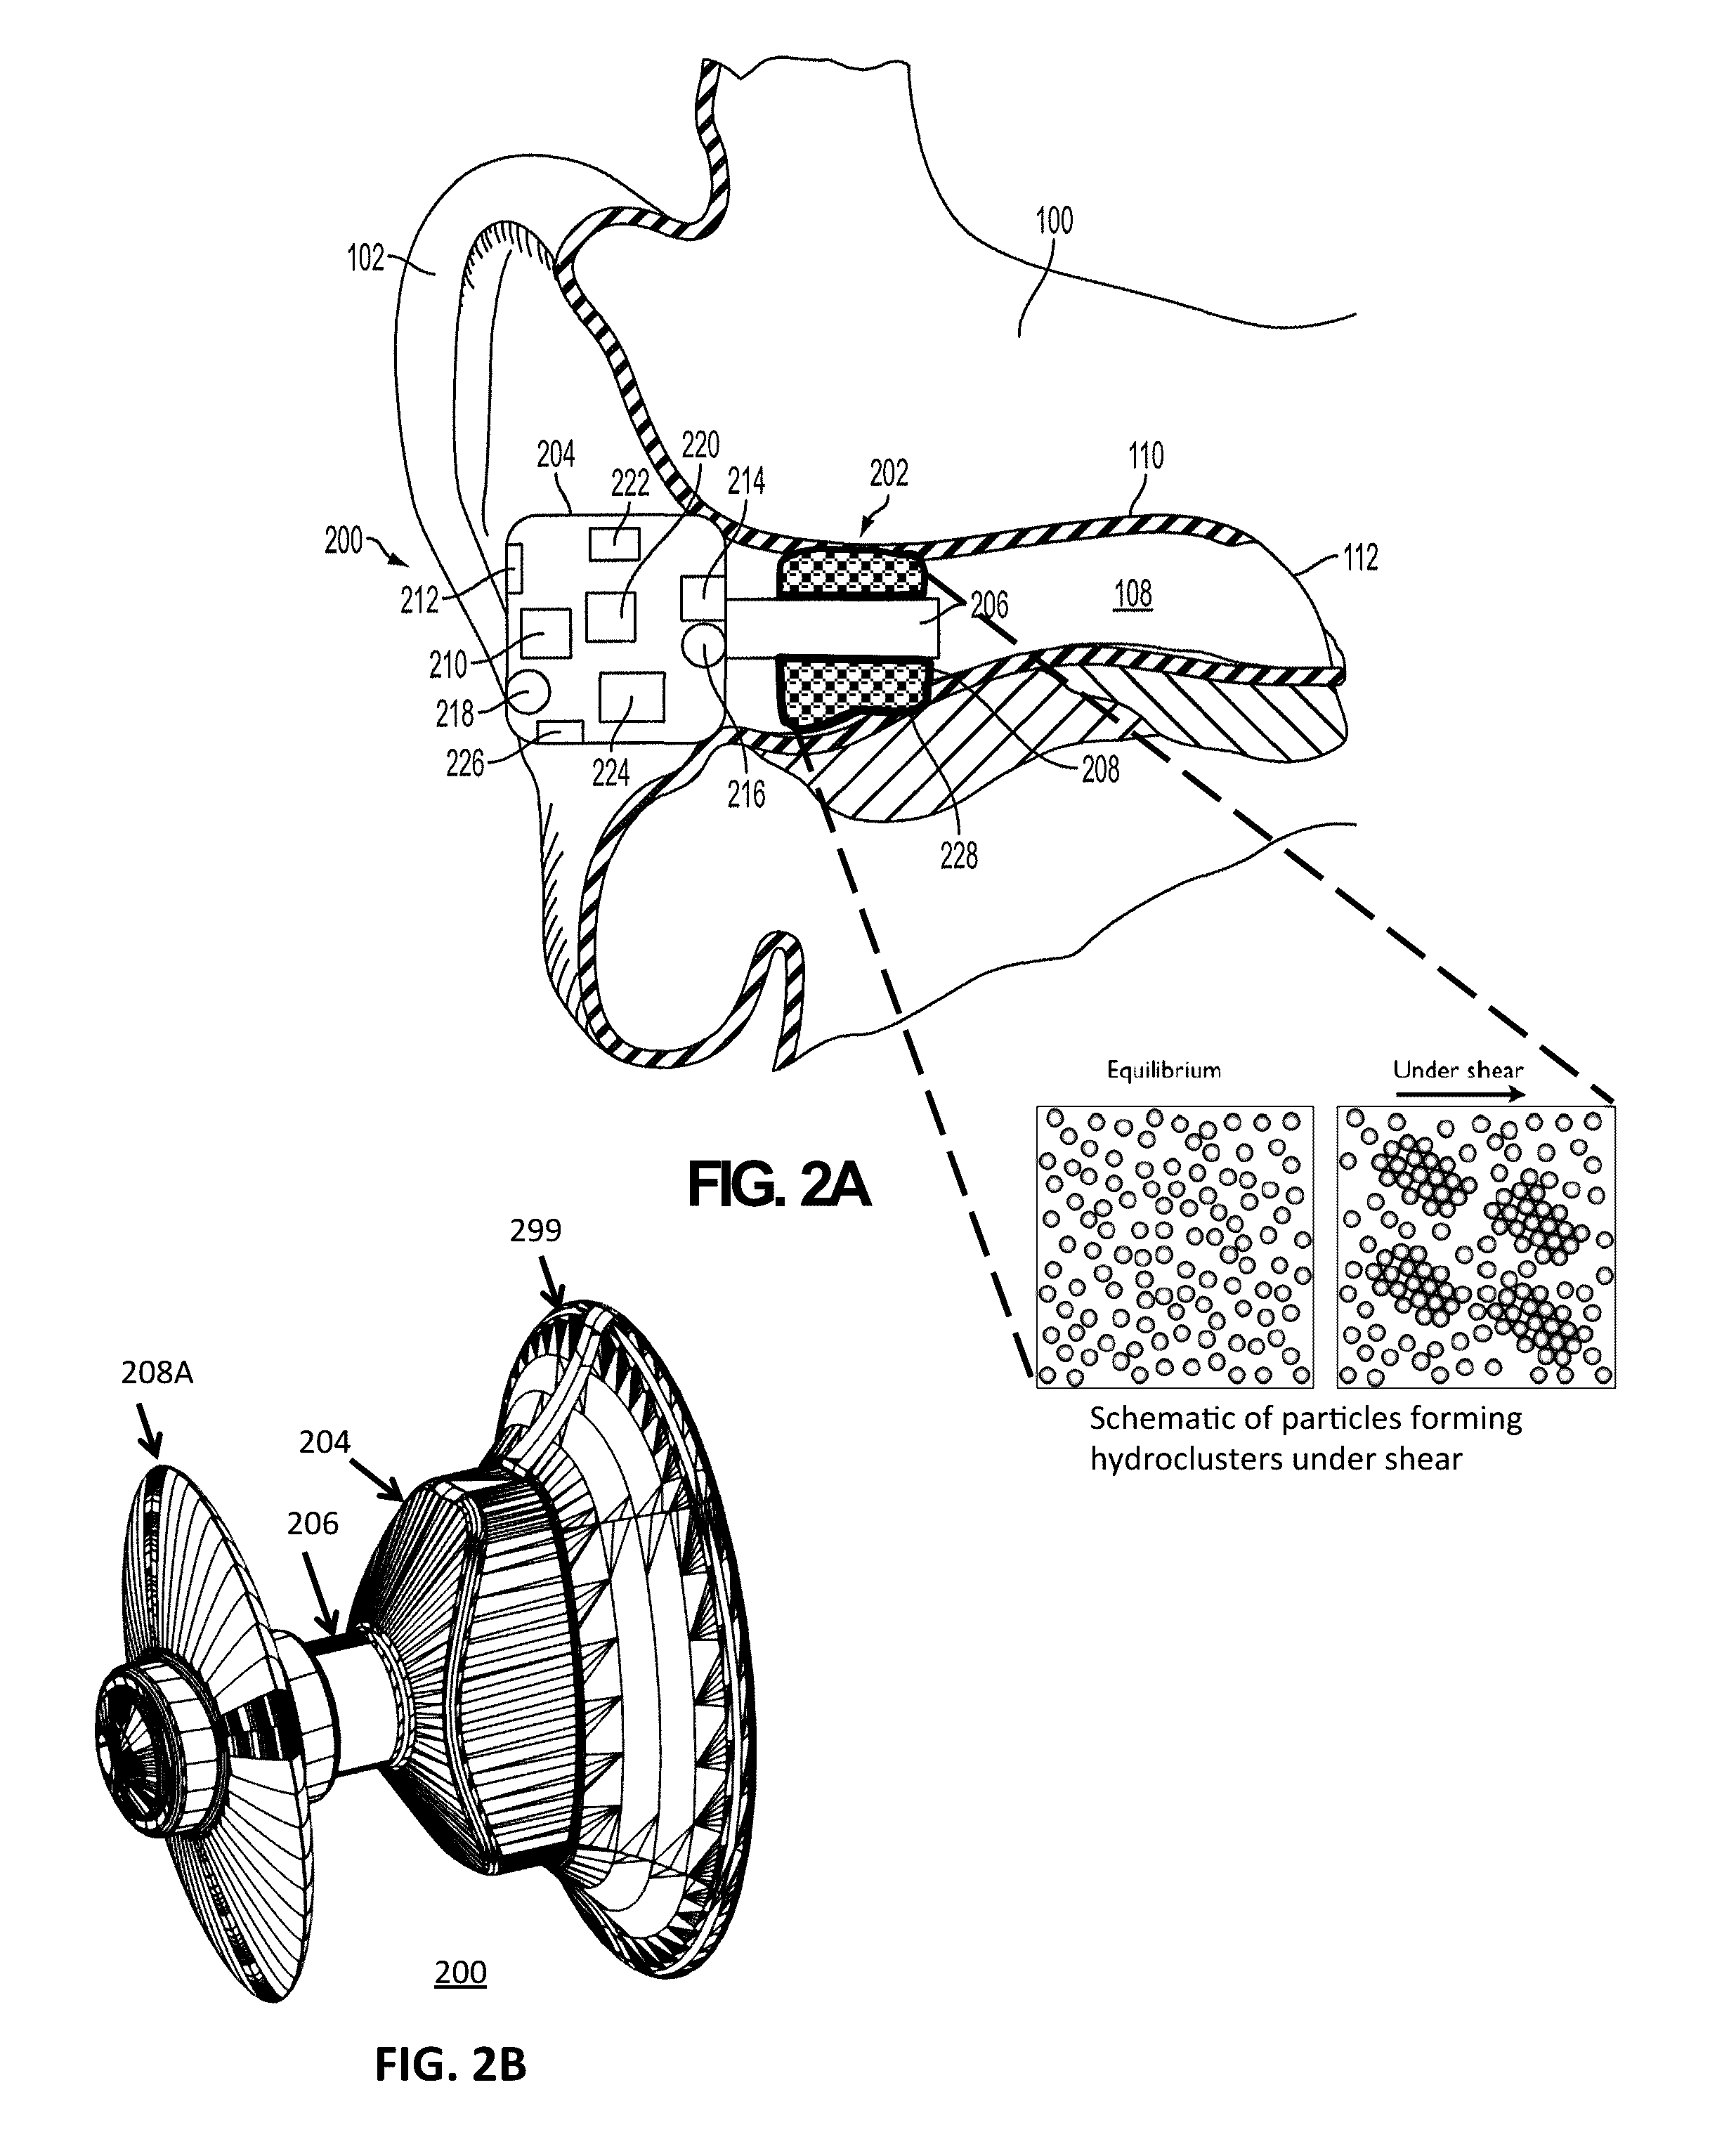 Methods and devices for attenuating sound in a conduit or chamber